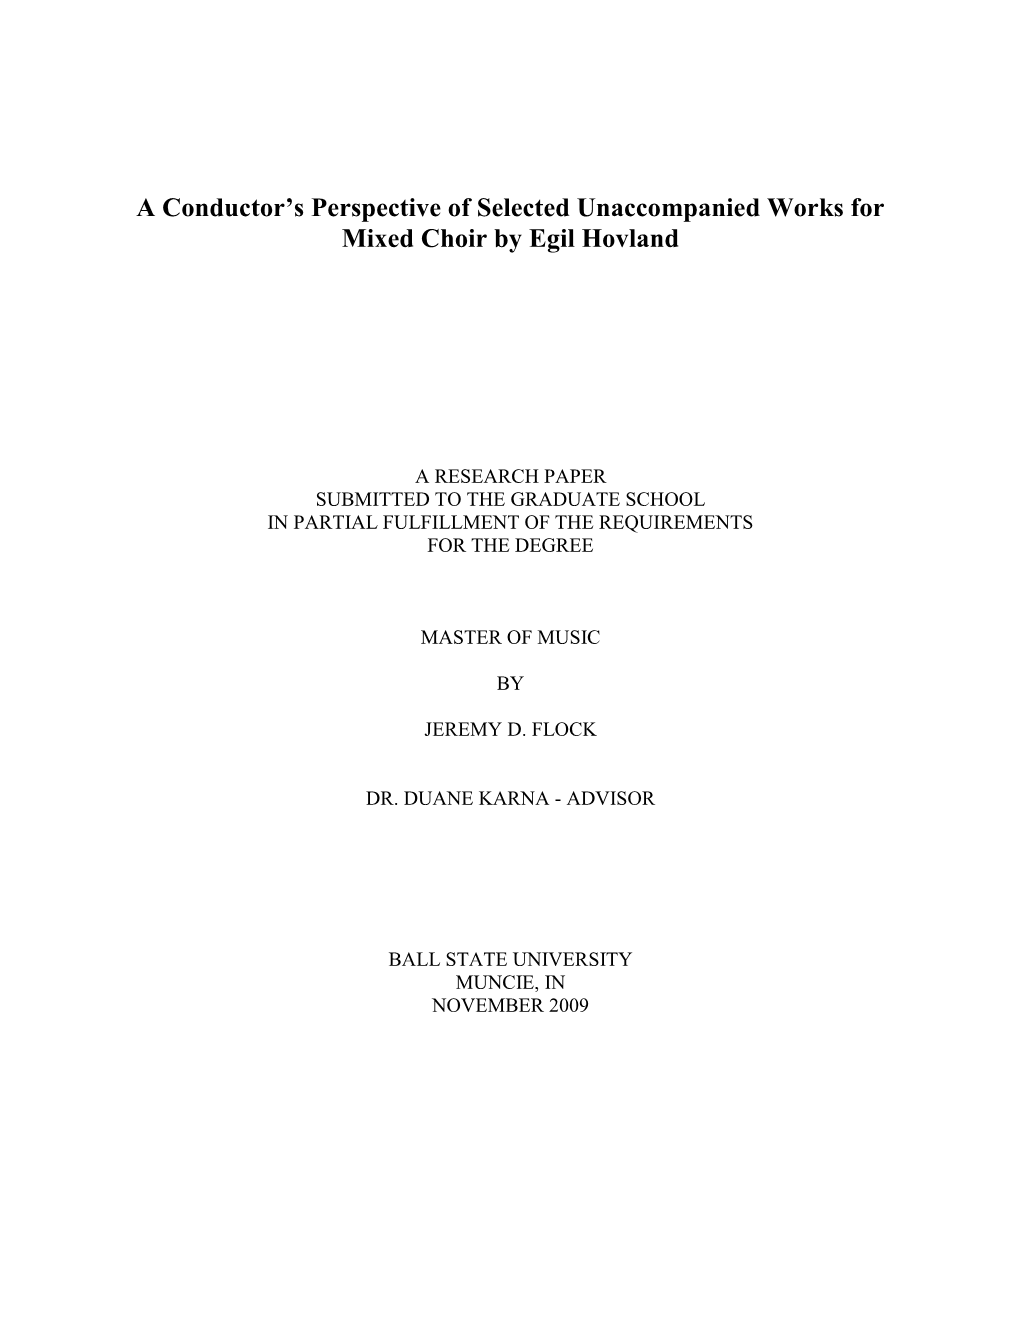 A Conductor's Perspective of Selected Unaccompanied Works for Mixed